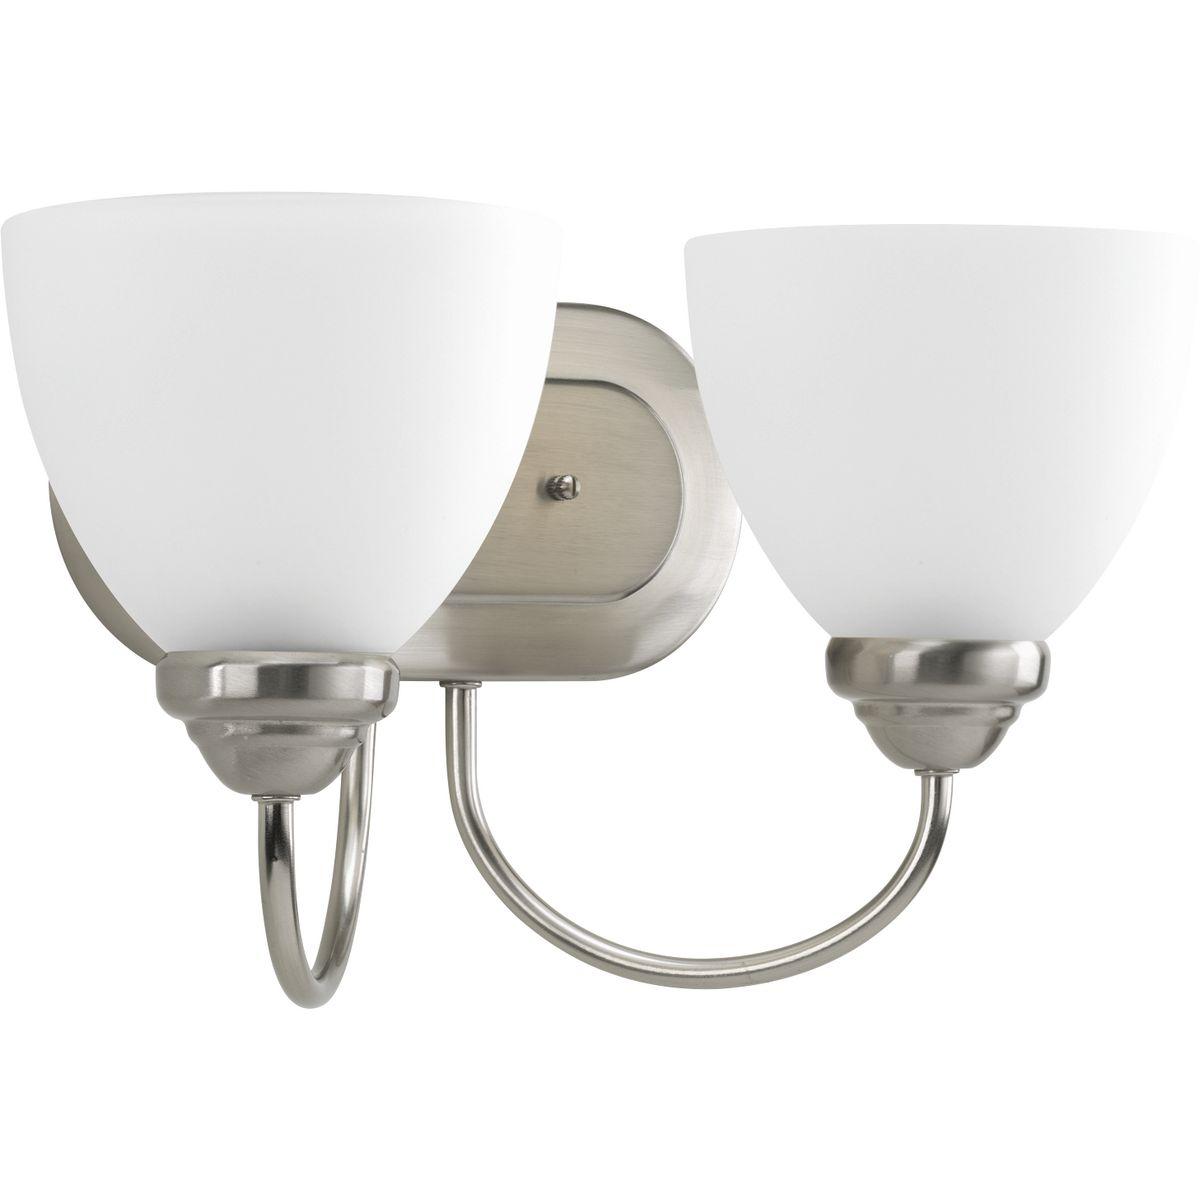 Hubbell P2915-09 The Heart Collection possesses a smart simplicity to complement today's home. This two-light bath bracket includes etched glass shades to add distinction and provide pleasing illumination to any room. Versatile design permits installation of fixture facin